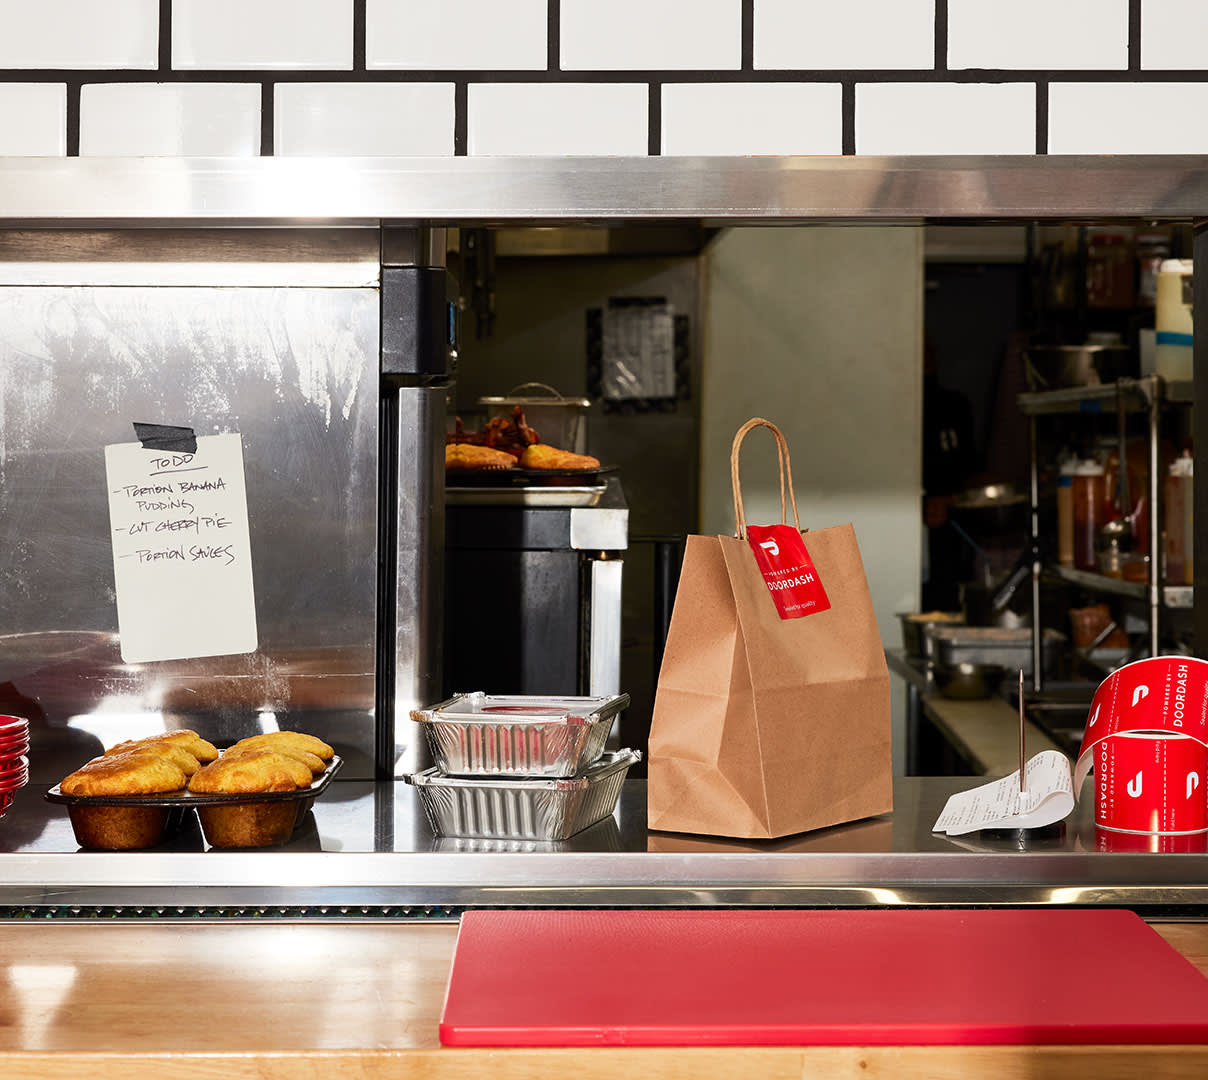 Mx - DoorDash bag and muffins on counter